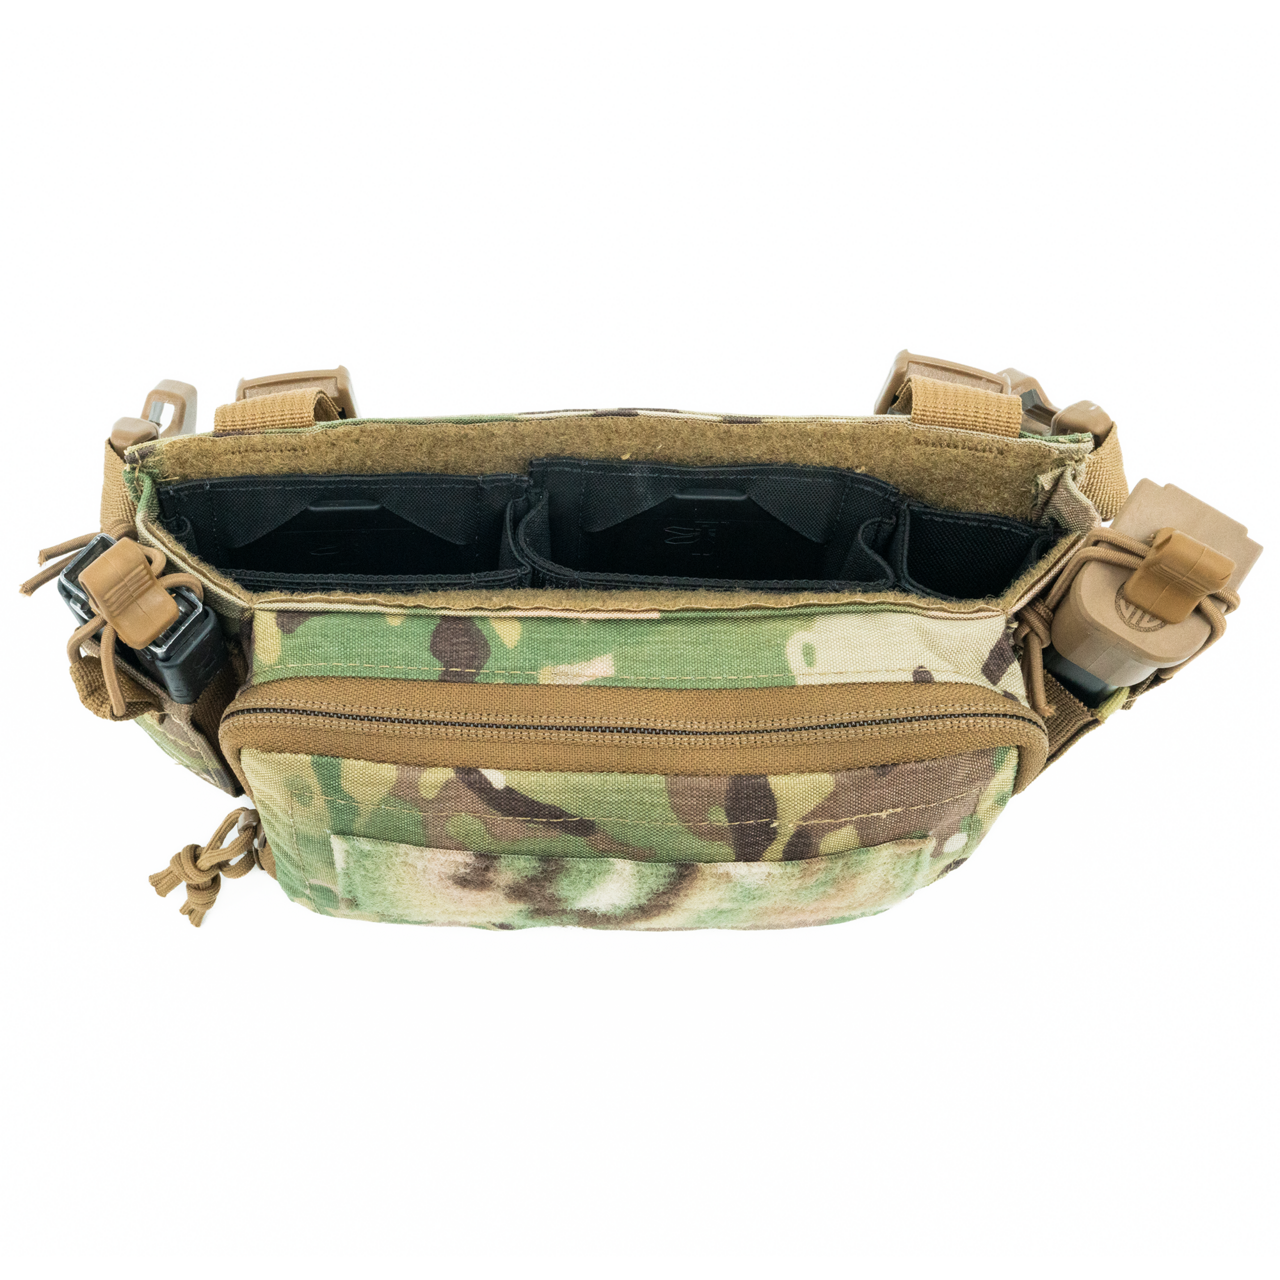 Disruptive Environments Micro Chest Rig Multicam